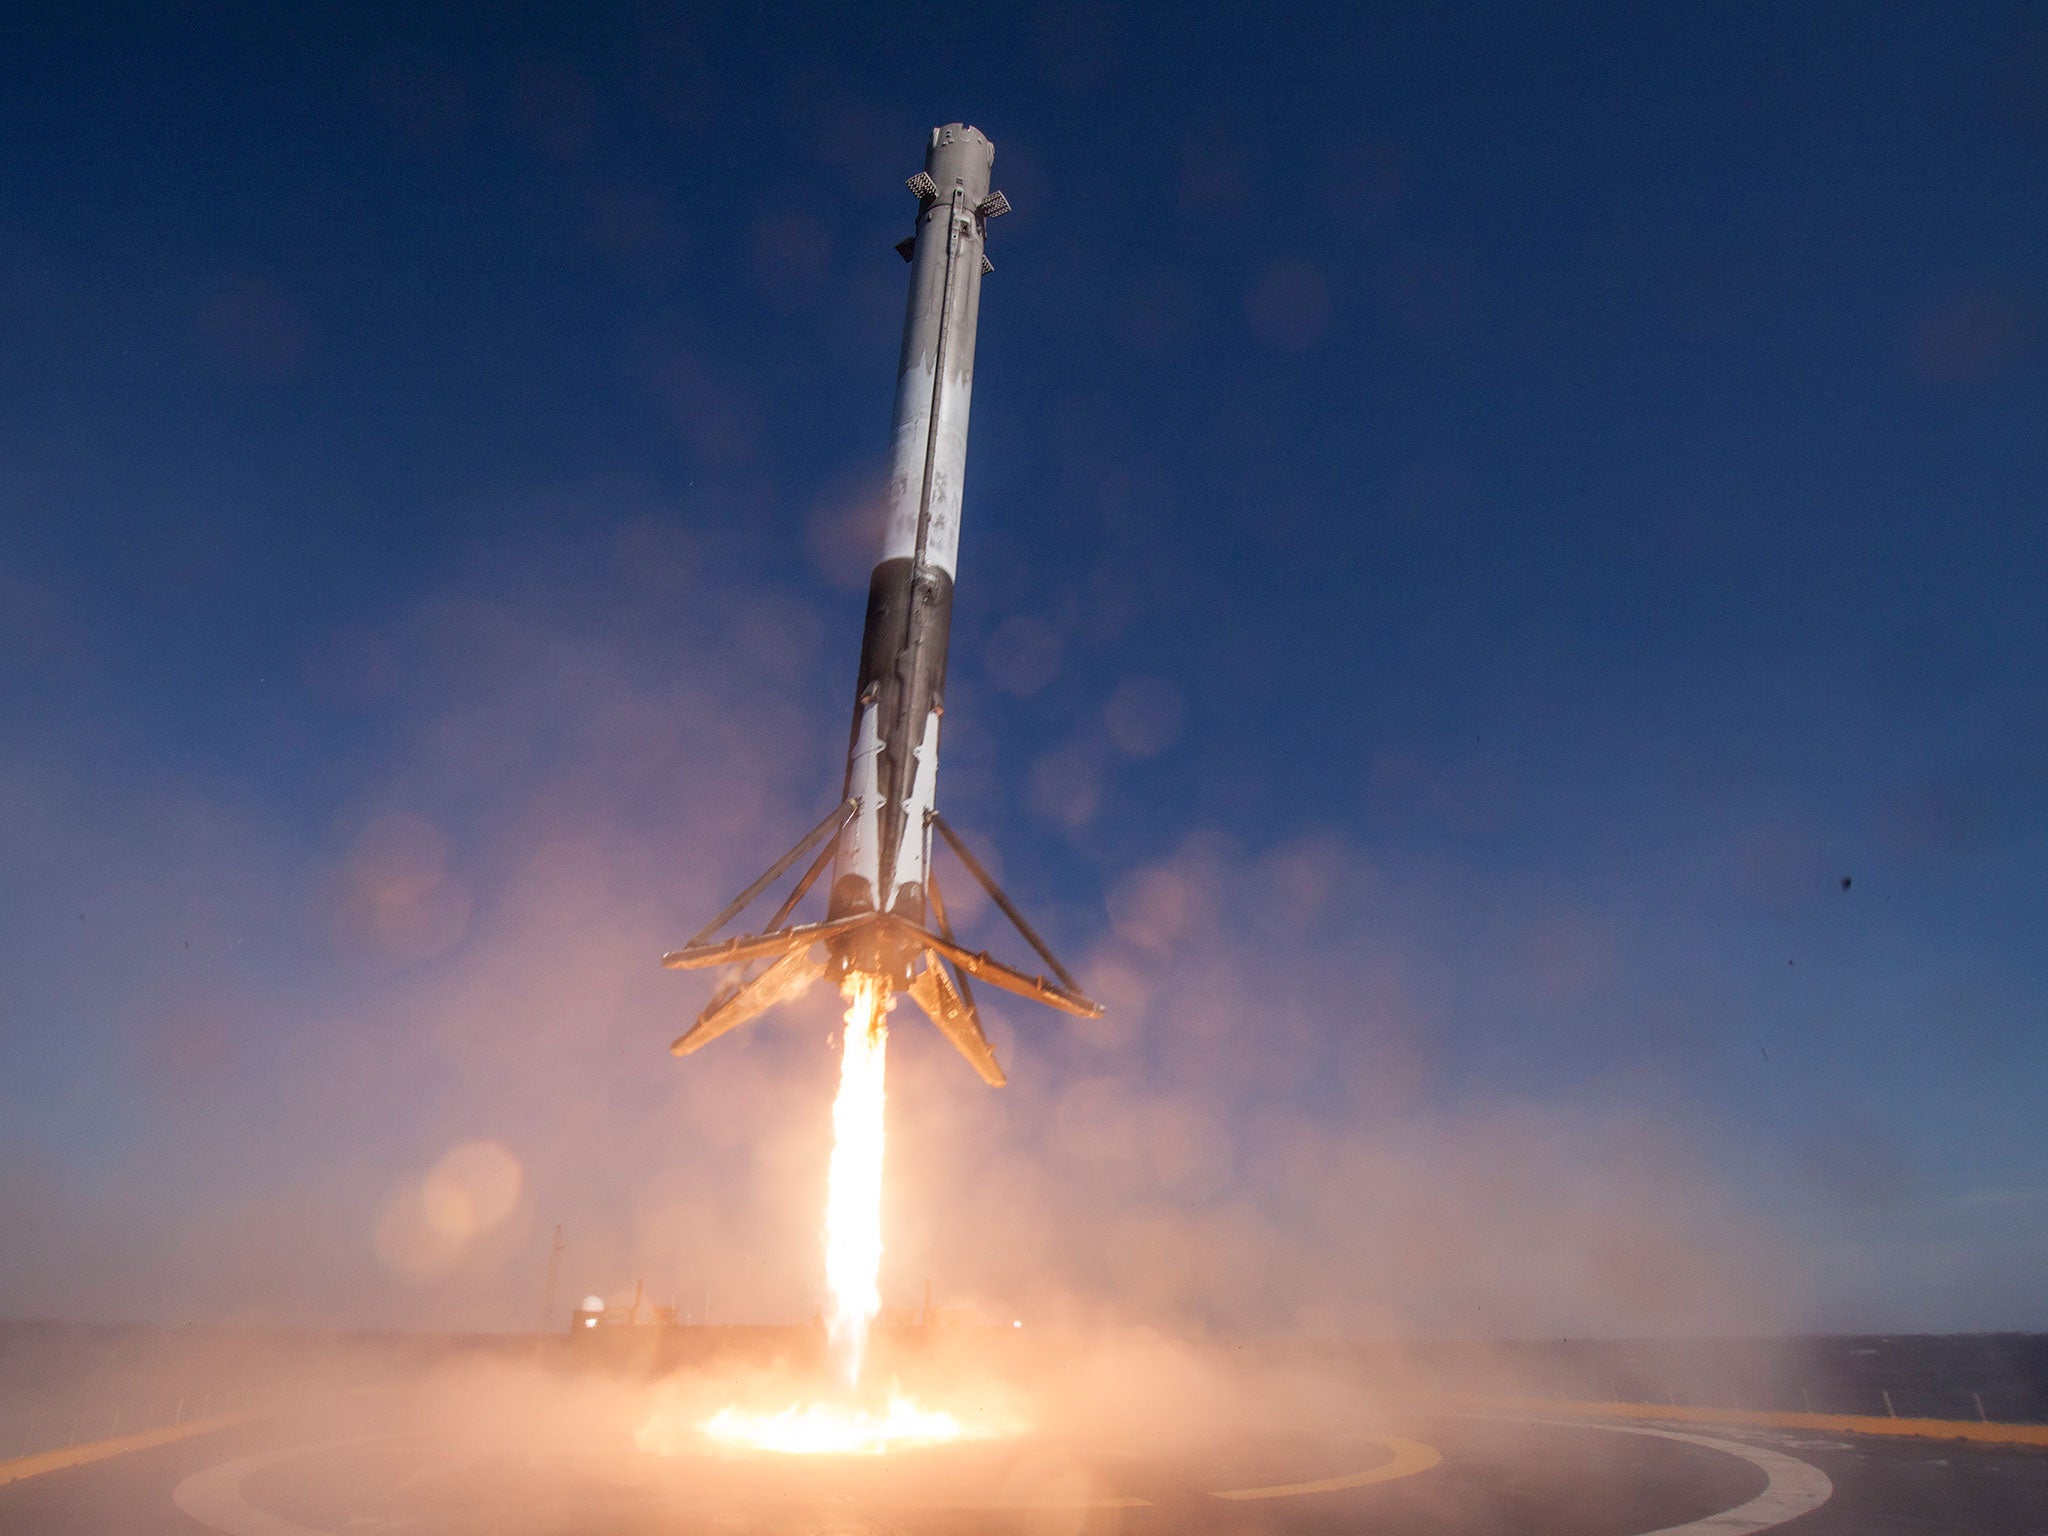 A Falcon 9 rocket touches down at sea in April's first successful landing